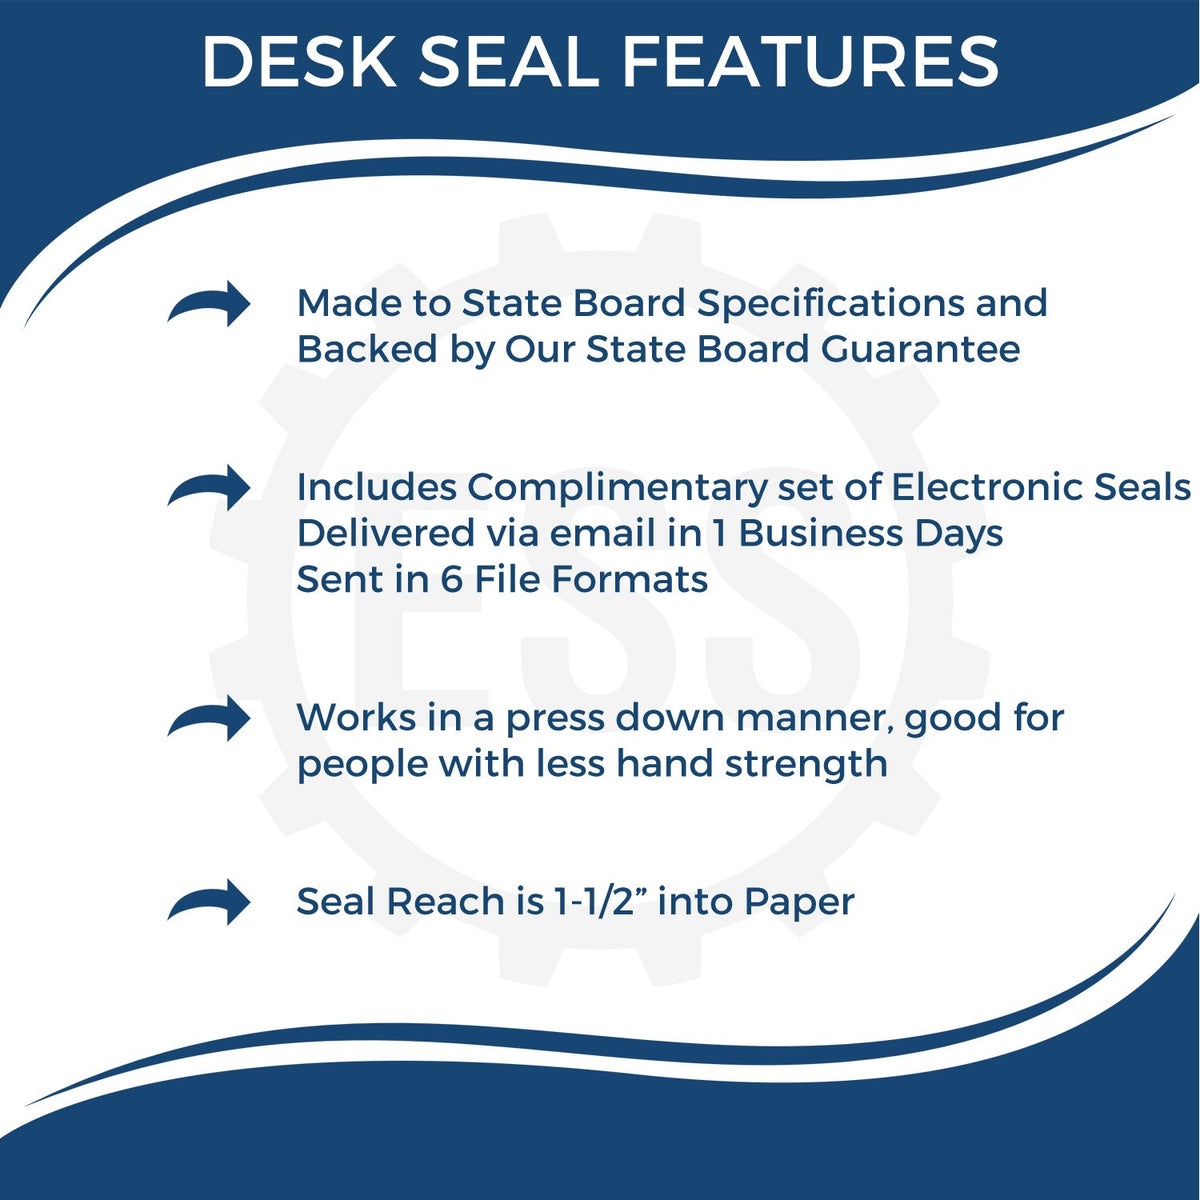 A picture of an infographic highlighting the selling points for the Idaho Desk Surveyor Seal Embosser